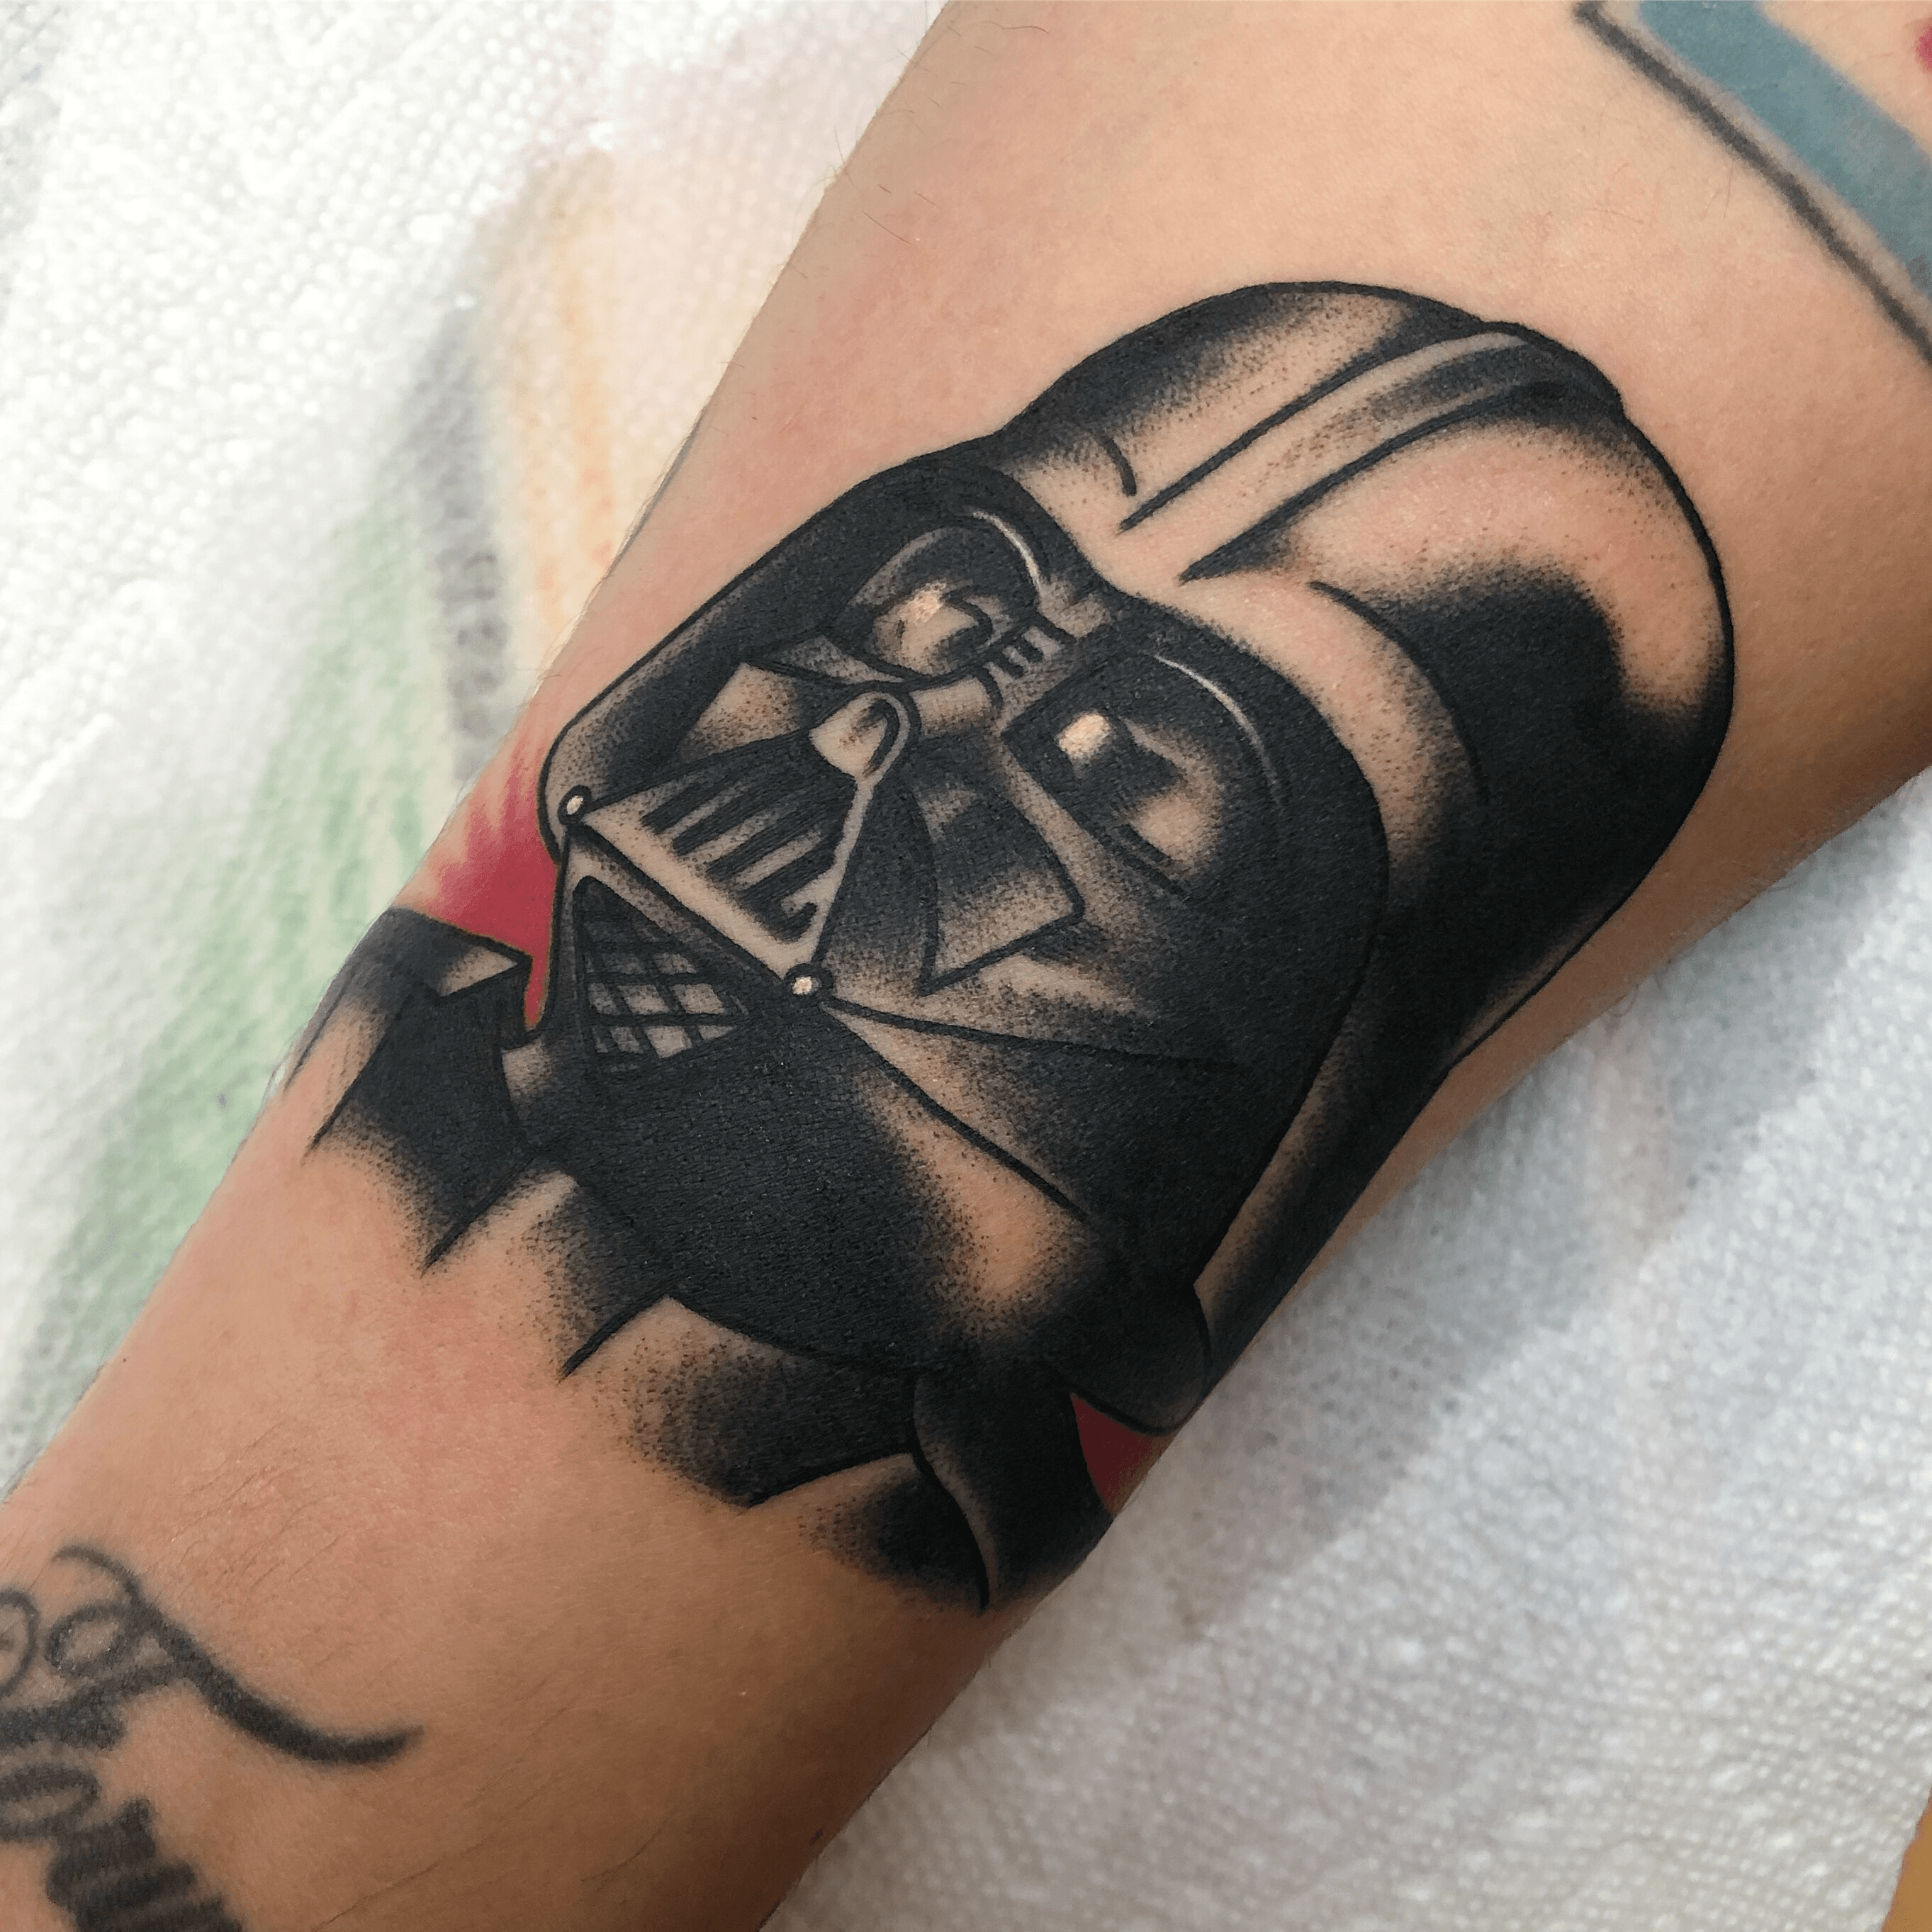 21 Darth Vader Tattoos To Lure You To The Dark Side  Body Artifact